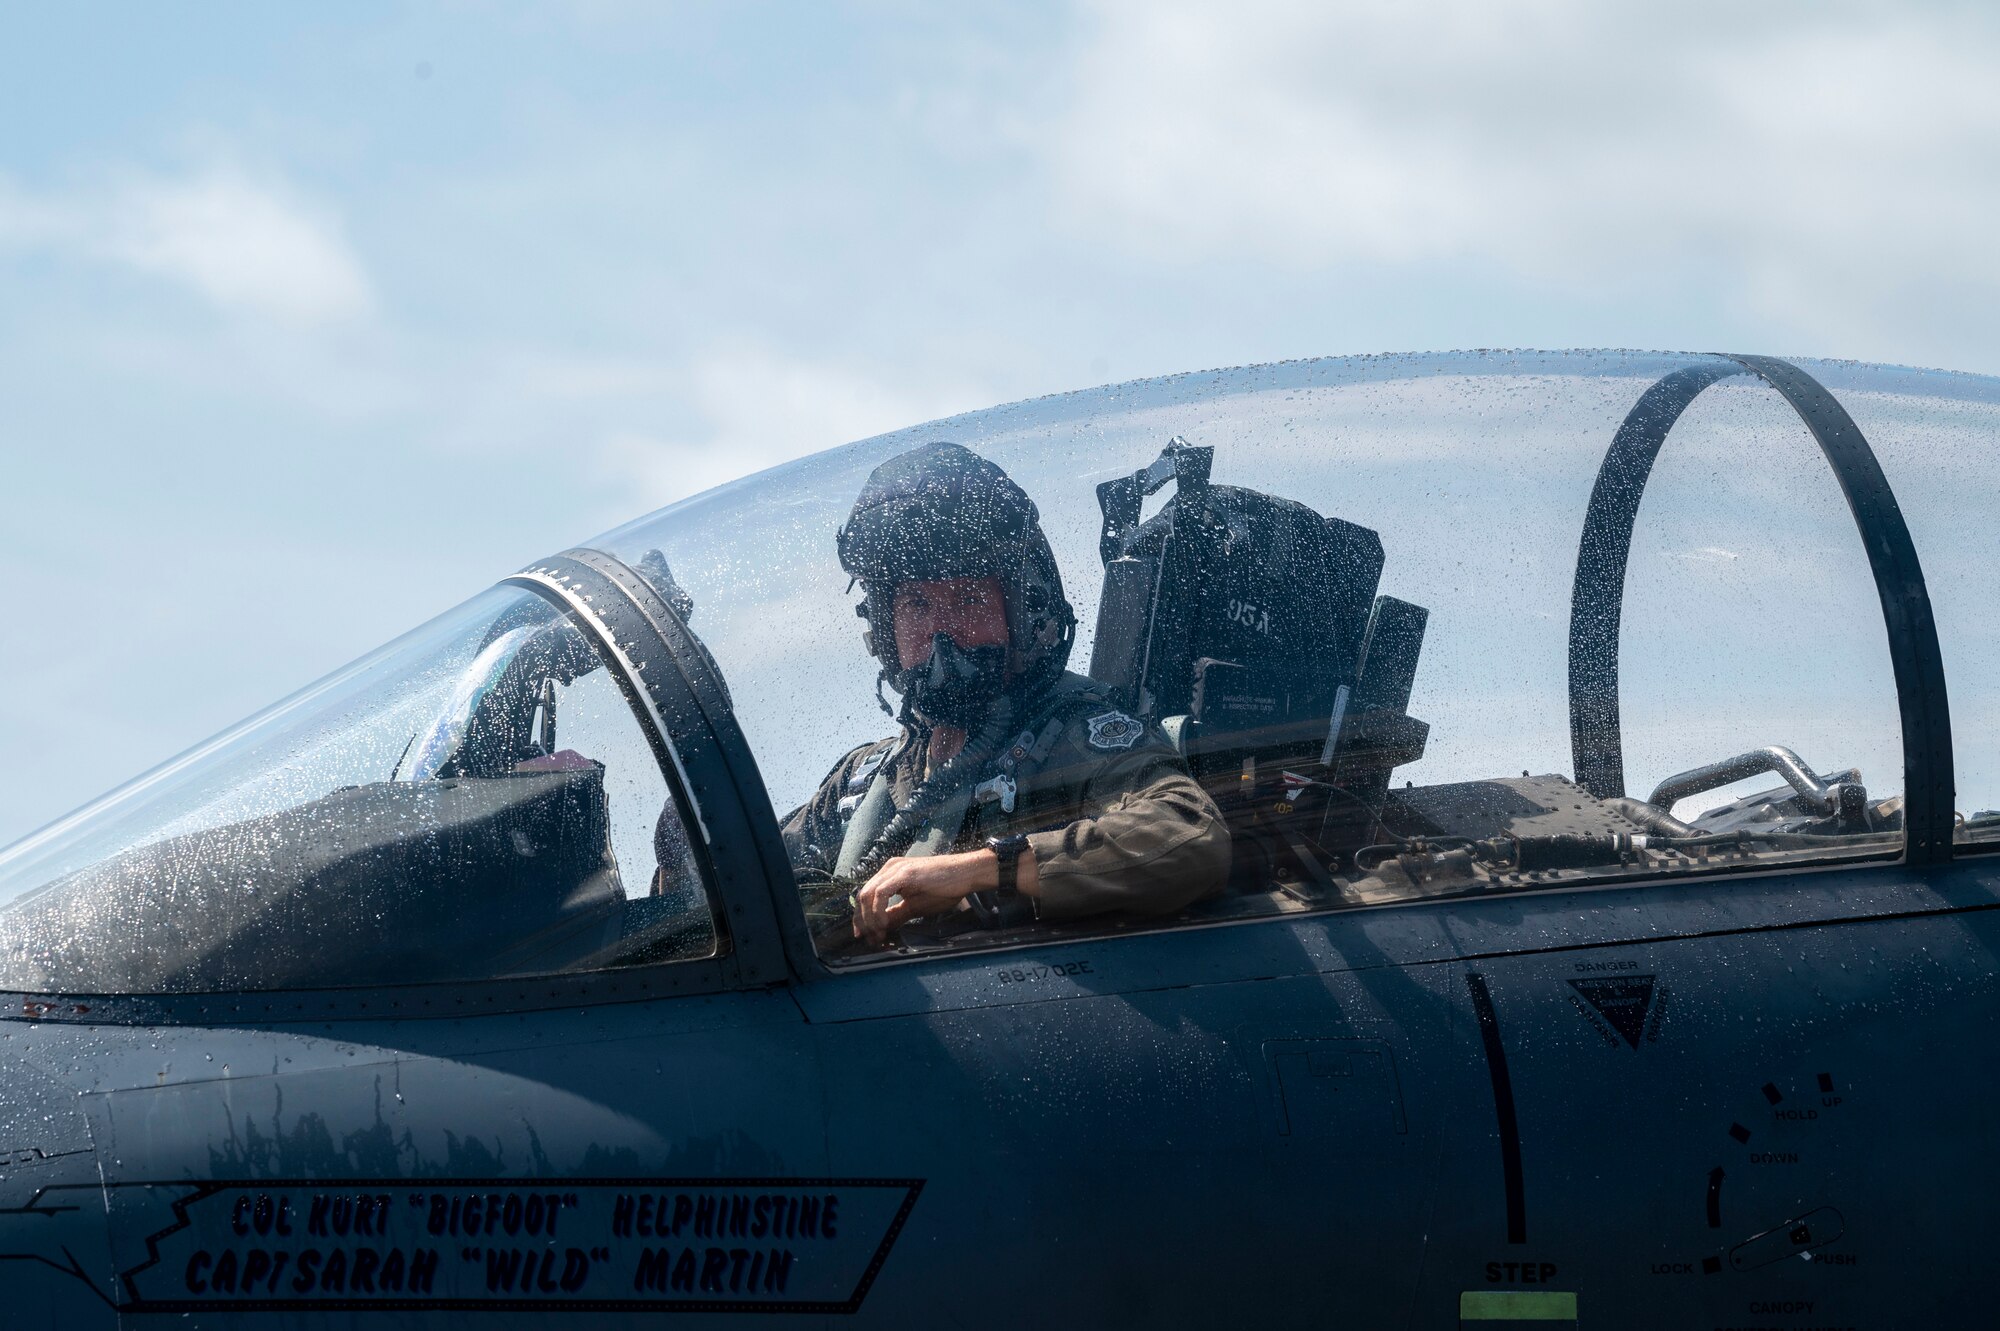 Col. Kurt Helphinstine, 4th Fighter Wing commander, returns from his final flight at Seymour Johnson Air Force Base, North Carolina, May 2, 2022. This was Helphinstine’s final flight before leaving the 4th FW. (U.S. Air Force photo by Senior Airman Kevin Holloway)